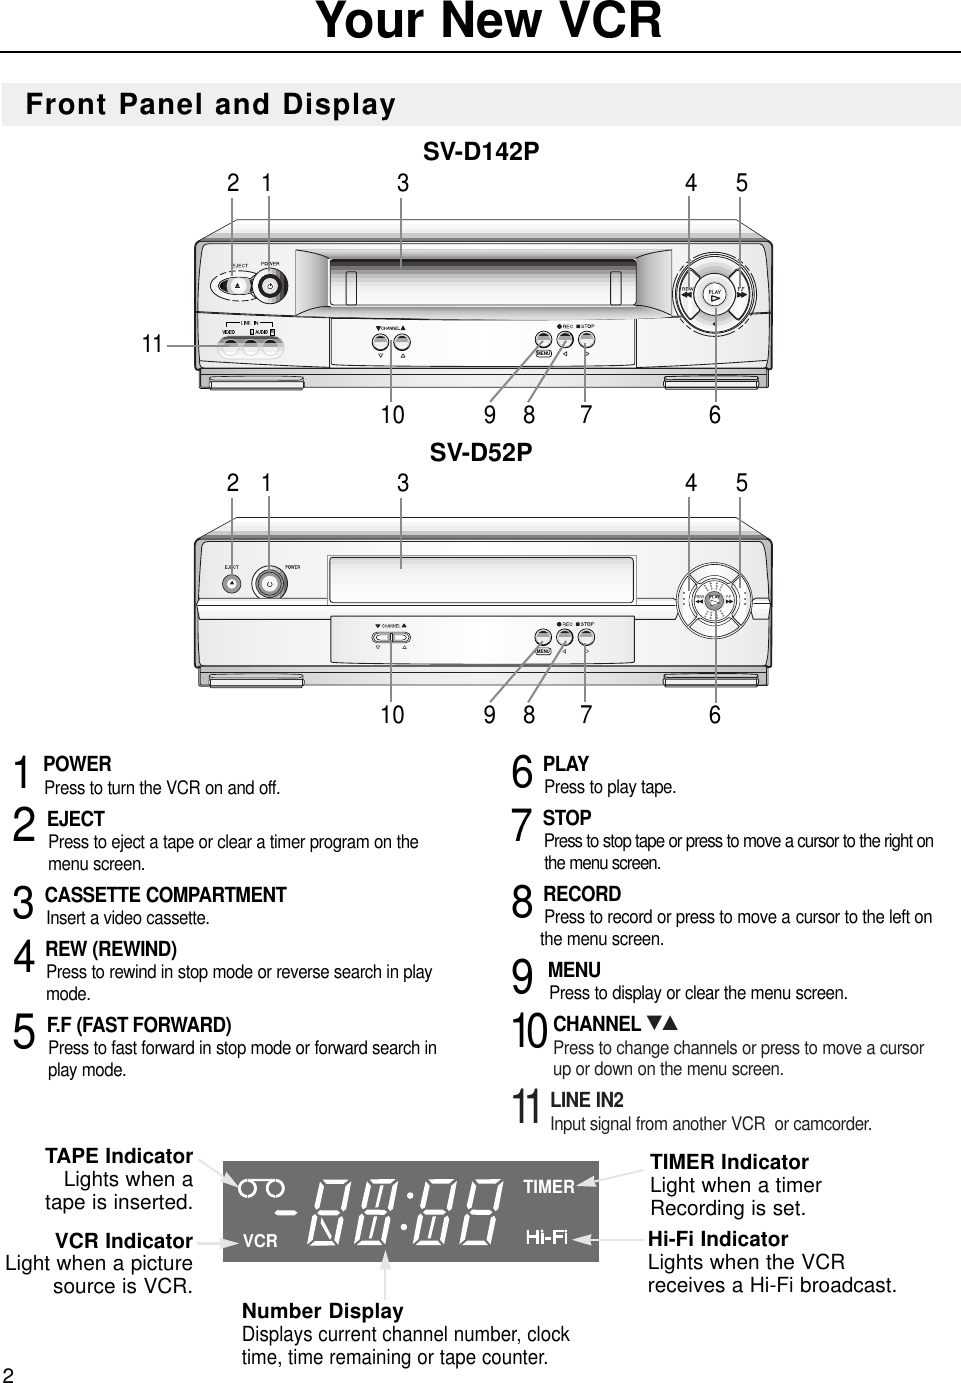 Your New VCR2TIMER Indicator Light when a timerRecording is set.VCR Indicator Light when a picturesource is VCR.TAPE Indicator Lights when atape is inserted.Hi-Fi IndicatorLights when the VCRreceives a Hi-Fi broadcast.Number DisplayDisplays current channel number, clocktime, time remaining or tape counter.MENU1 POWERPress to turn the VCR on and off.2 EJECTPress to eject a tape or clear a timer program on themenu screen.3 CASSETTE COMPARTMENTInsert a video cassette.4 REW (REWIND)Press to rewind in stop mode or reverse search in playmode.5 F.F (FAST FORWARD)Press to fast forward in stop mode or forward search inplay mode.6 PLAYPress to play tape.7 STOPPress to stop tape or press to move a cursor to the right on the menu screen. 8 RECORDPress to record or press to move a cursor to the left on the menu screen.    9 MENU Press to display or clear the menu screen. 10CHANNEL ▼▲Press to change channels or press to move a cursorup or down on the menu screen.11LINE IN2          Input signal from another VCR  or camcorder.VCRTIMERFront Panel and Display2   1                  3                                        4      5 10        9   8   7            6 11SV-D142PMENUREW                          F.F2   1                  3                                        4      5 10        9   8   7            6 SV-D52P